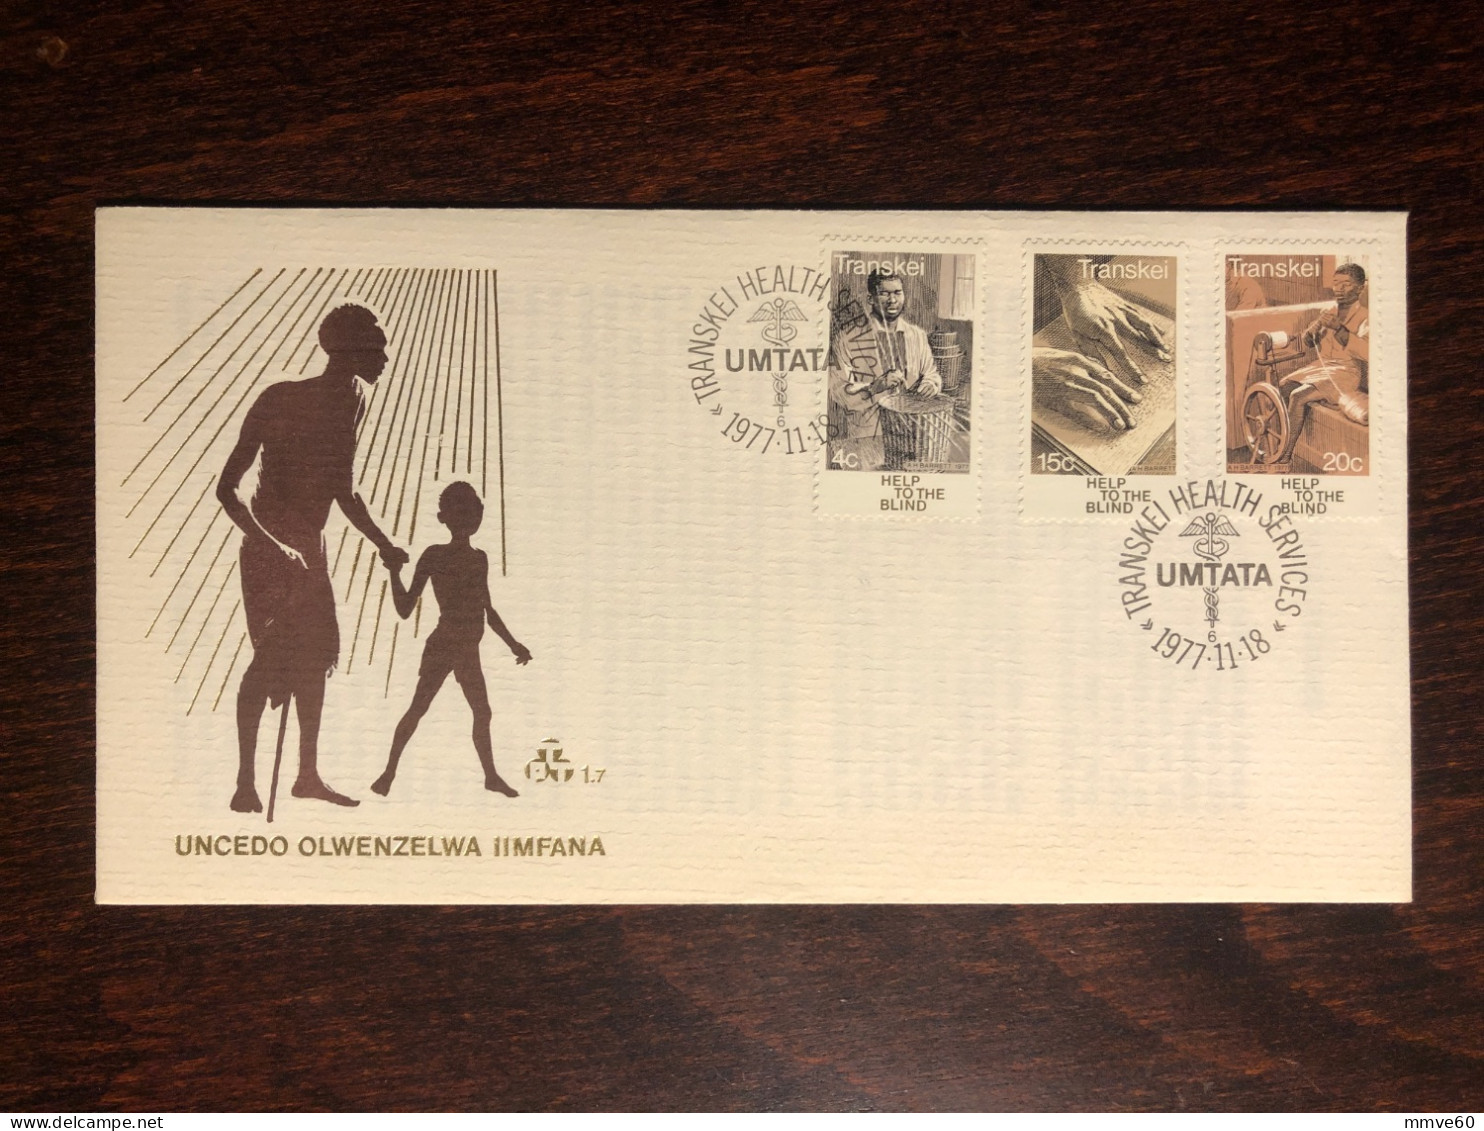 TRANSKEI FDC COVER 1977 YEAR BLINDNESS BLIND BRAILLE HEALTH MEDICINE STAMPS - Transkei